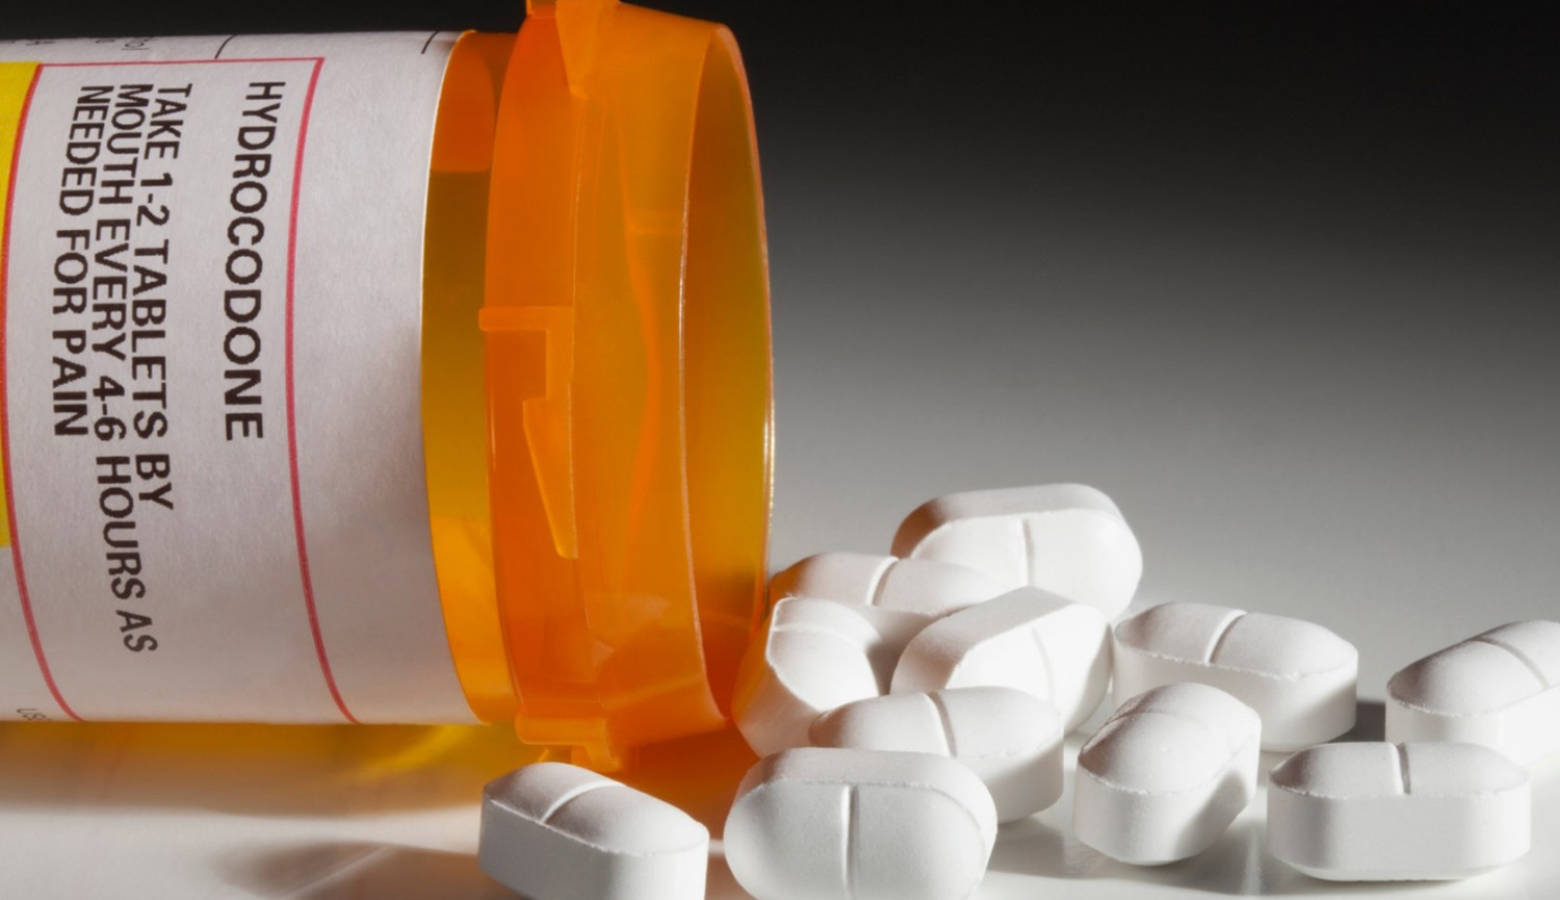 Indiana providers opioid decreased prescriptions by 35 percent over the past five years according to the American Medical Association Opioid Task Force 2019 Progress Report. (USDA)